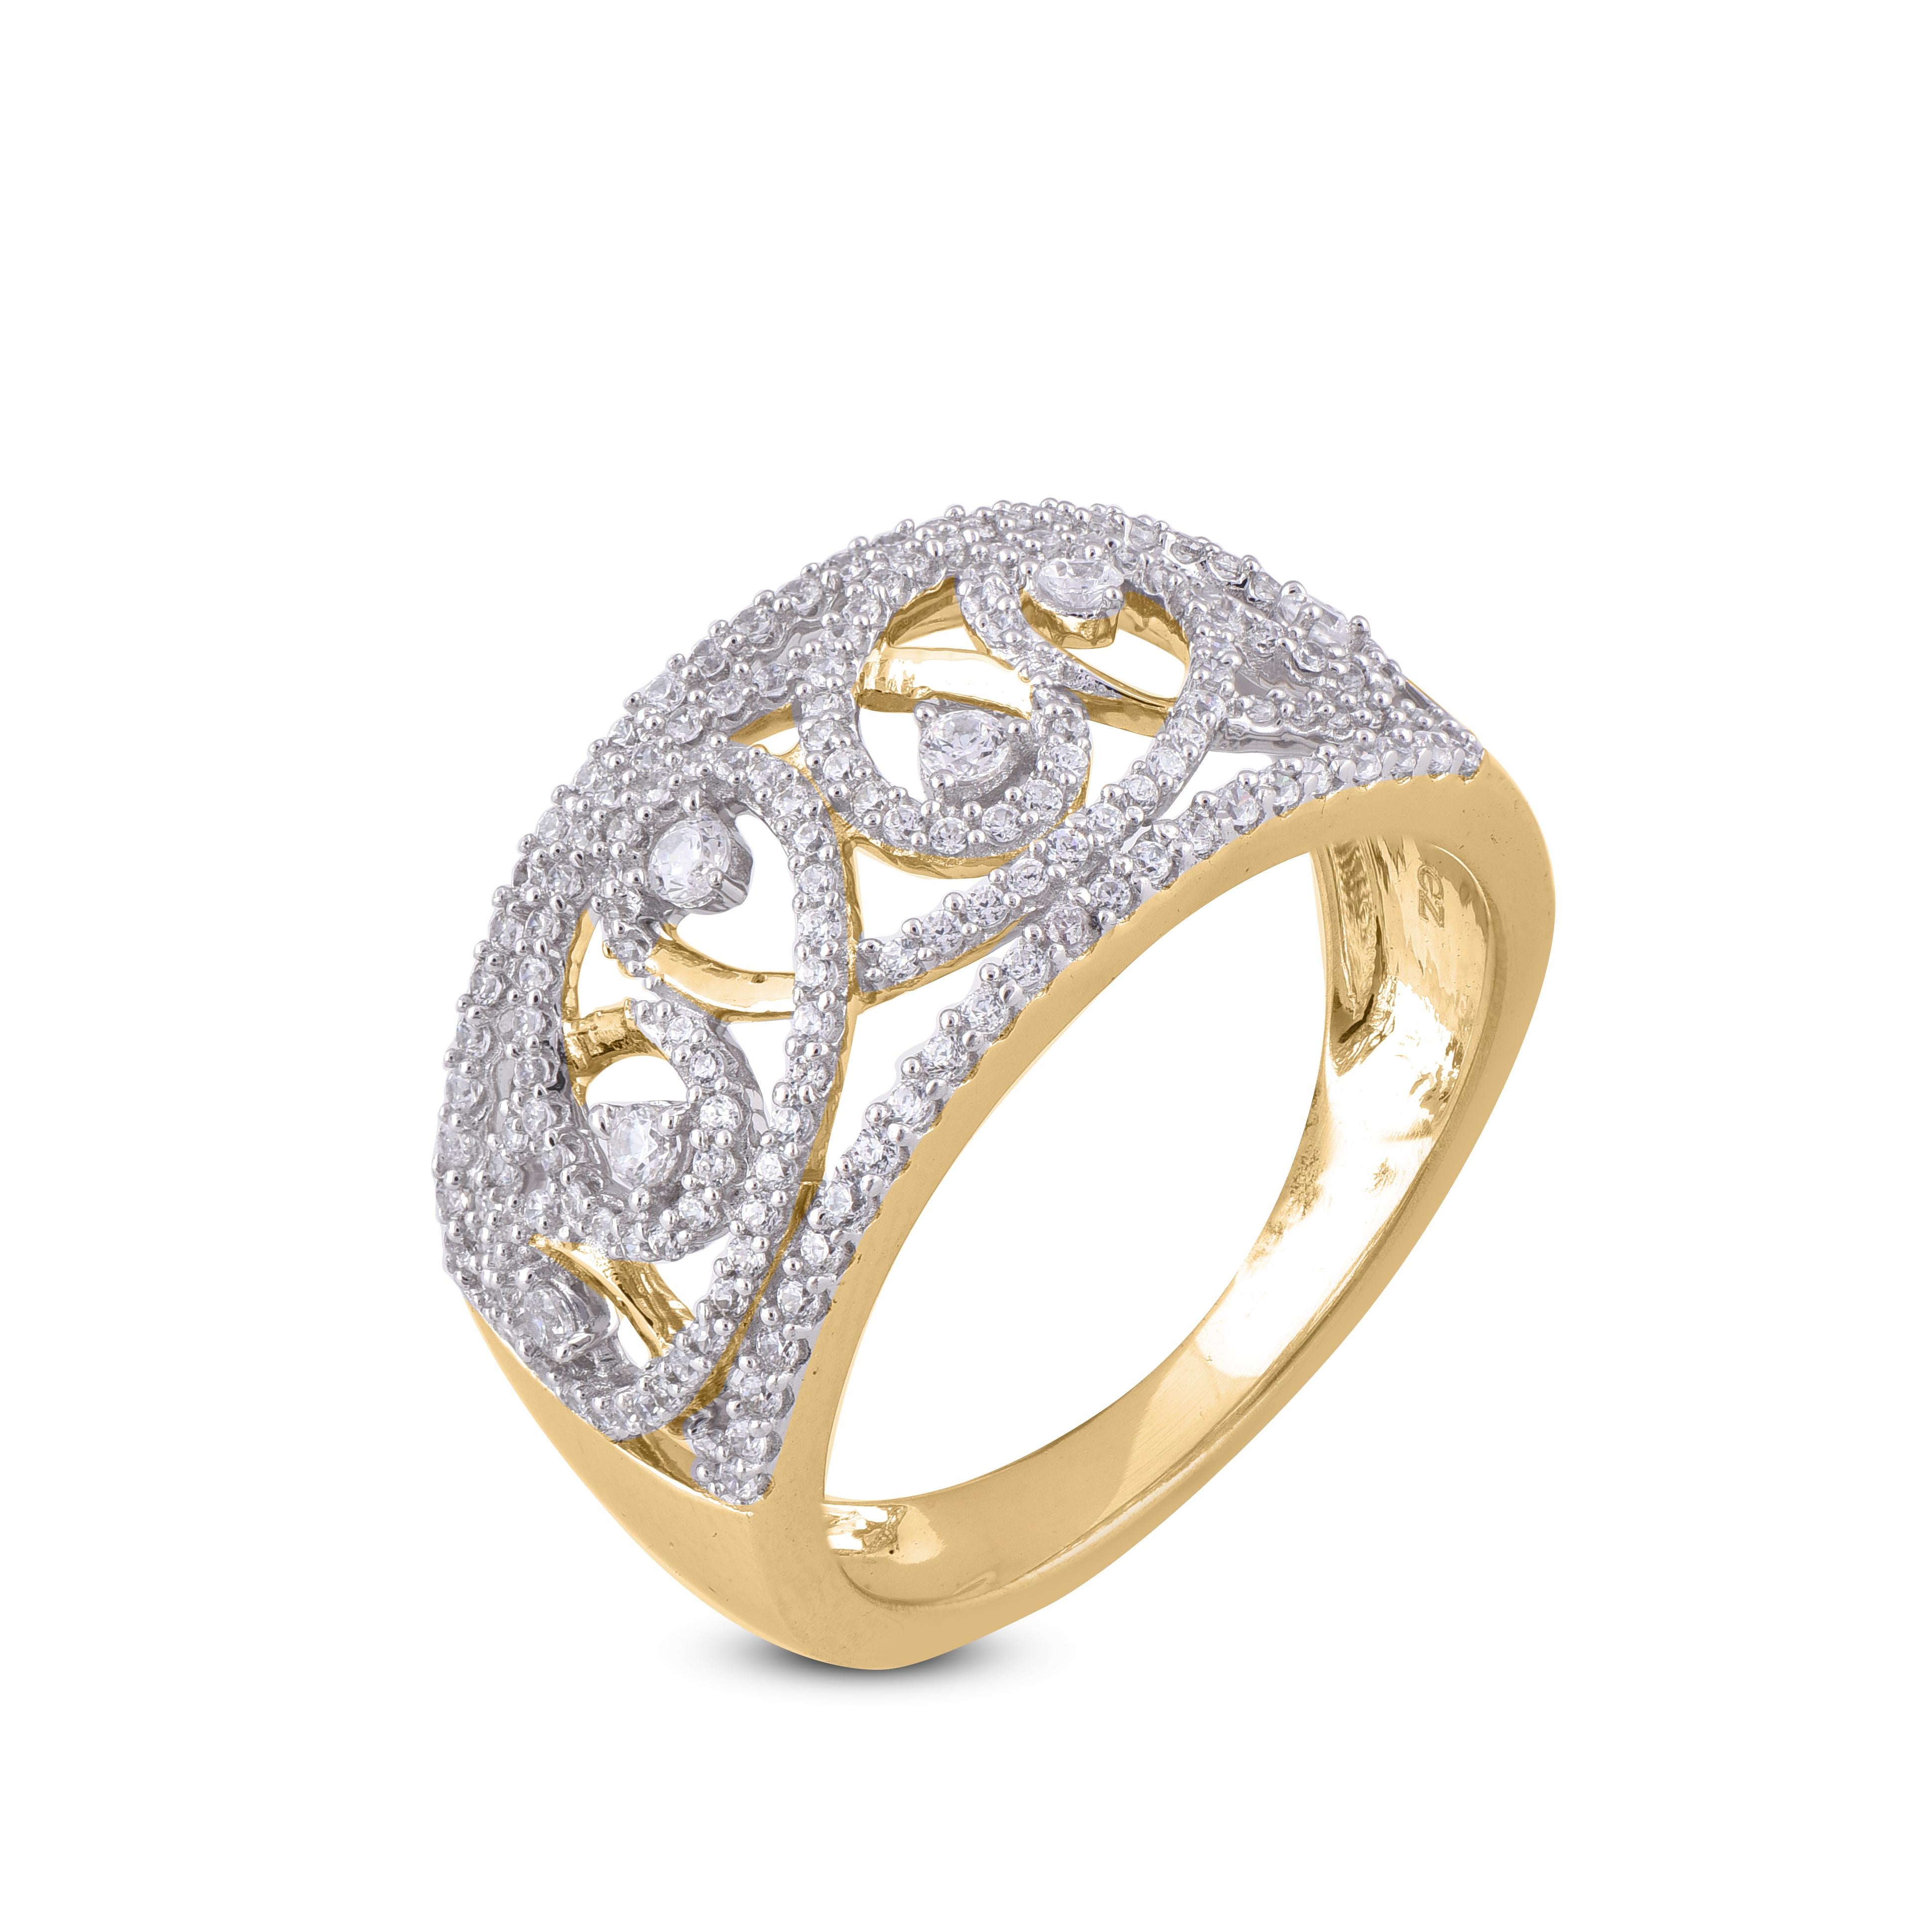 With one look of this 0.60 Carat Round diamond fashion anniversary band crafted in 14 Kt yellow gold. This band is beautifully designed and studded with 42 round diamond in prong and pressure setting. We only use natural diamond which shines in H-I